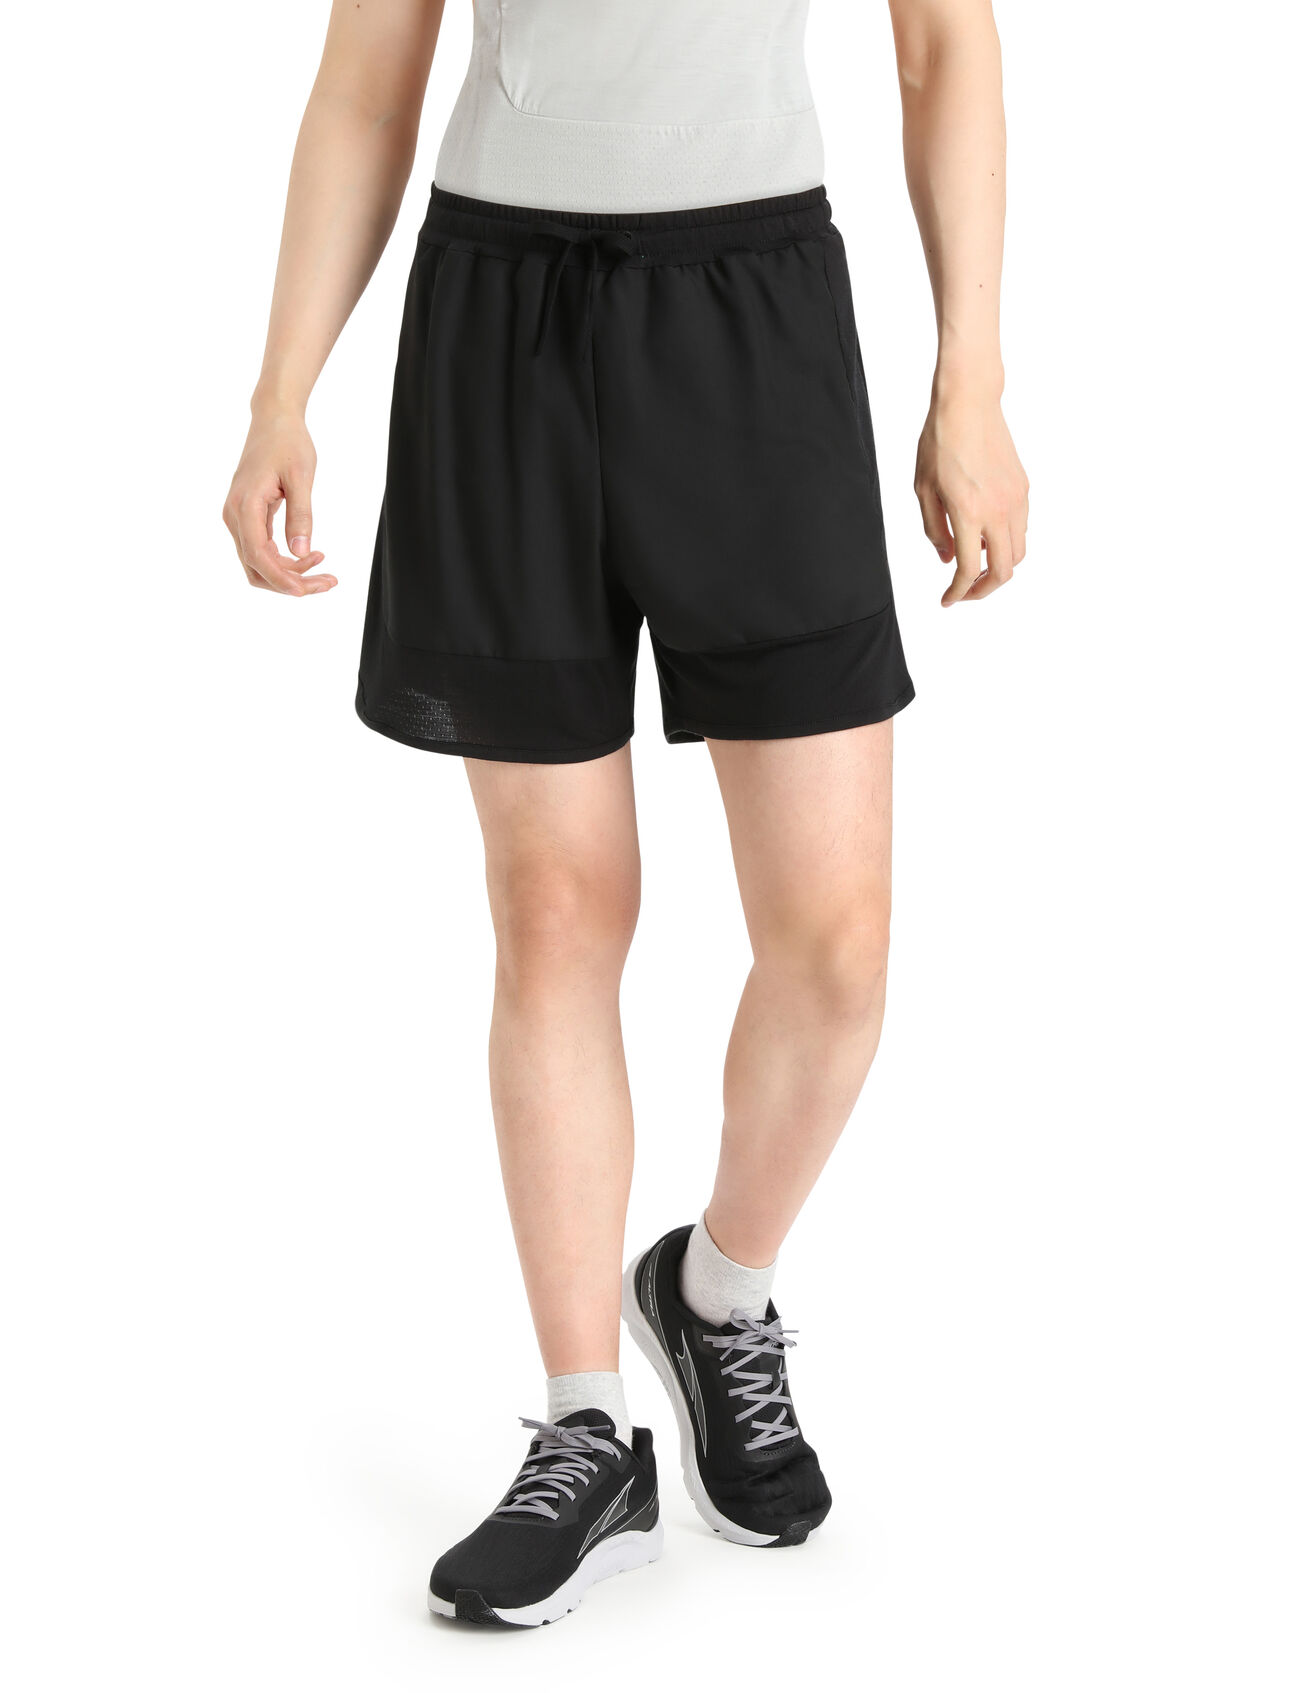 Mens ZoneKnit™ Merino 5.5'' Shorts Lightweight, highly breathable shorts designed for running, the ZoneKnit™ Shorts combine our Cool-Lite™ jersey fabric with body-mapped panels of Cool-Lite eyelet mesh for enhanced temperature regulation.